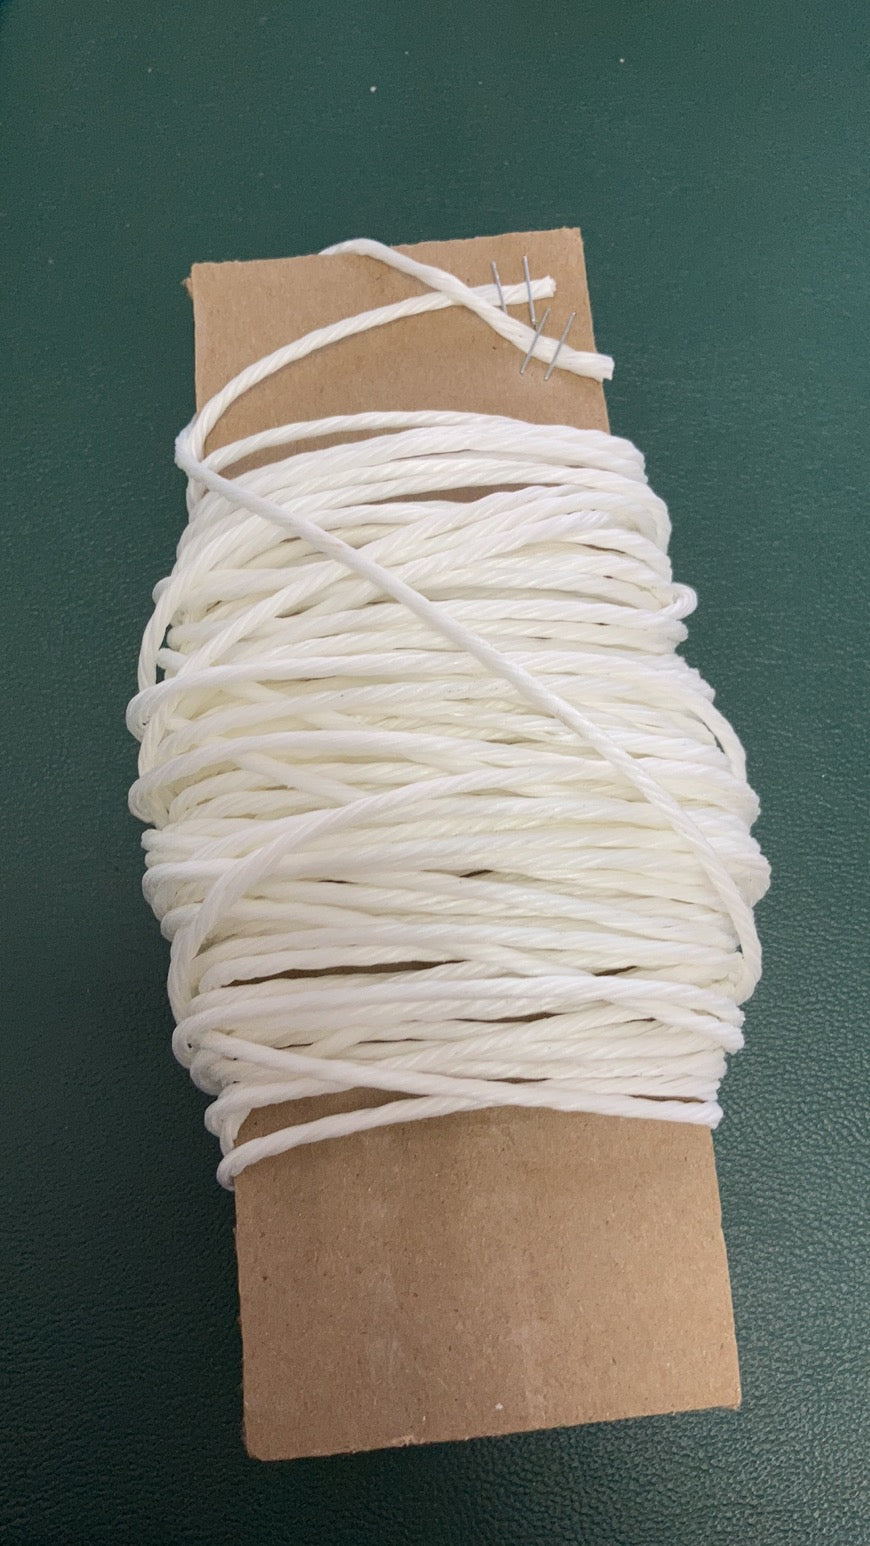 Upholstery Ludlow Spring Twine, 100% Polyester. Made In The U.S.A